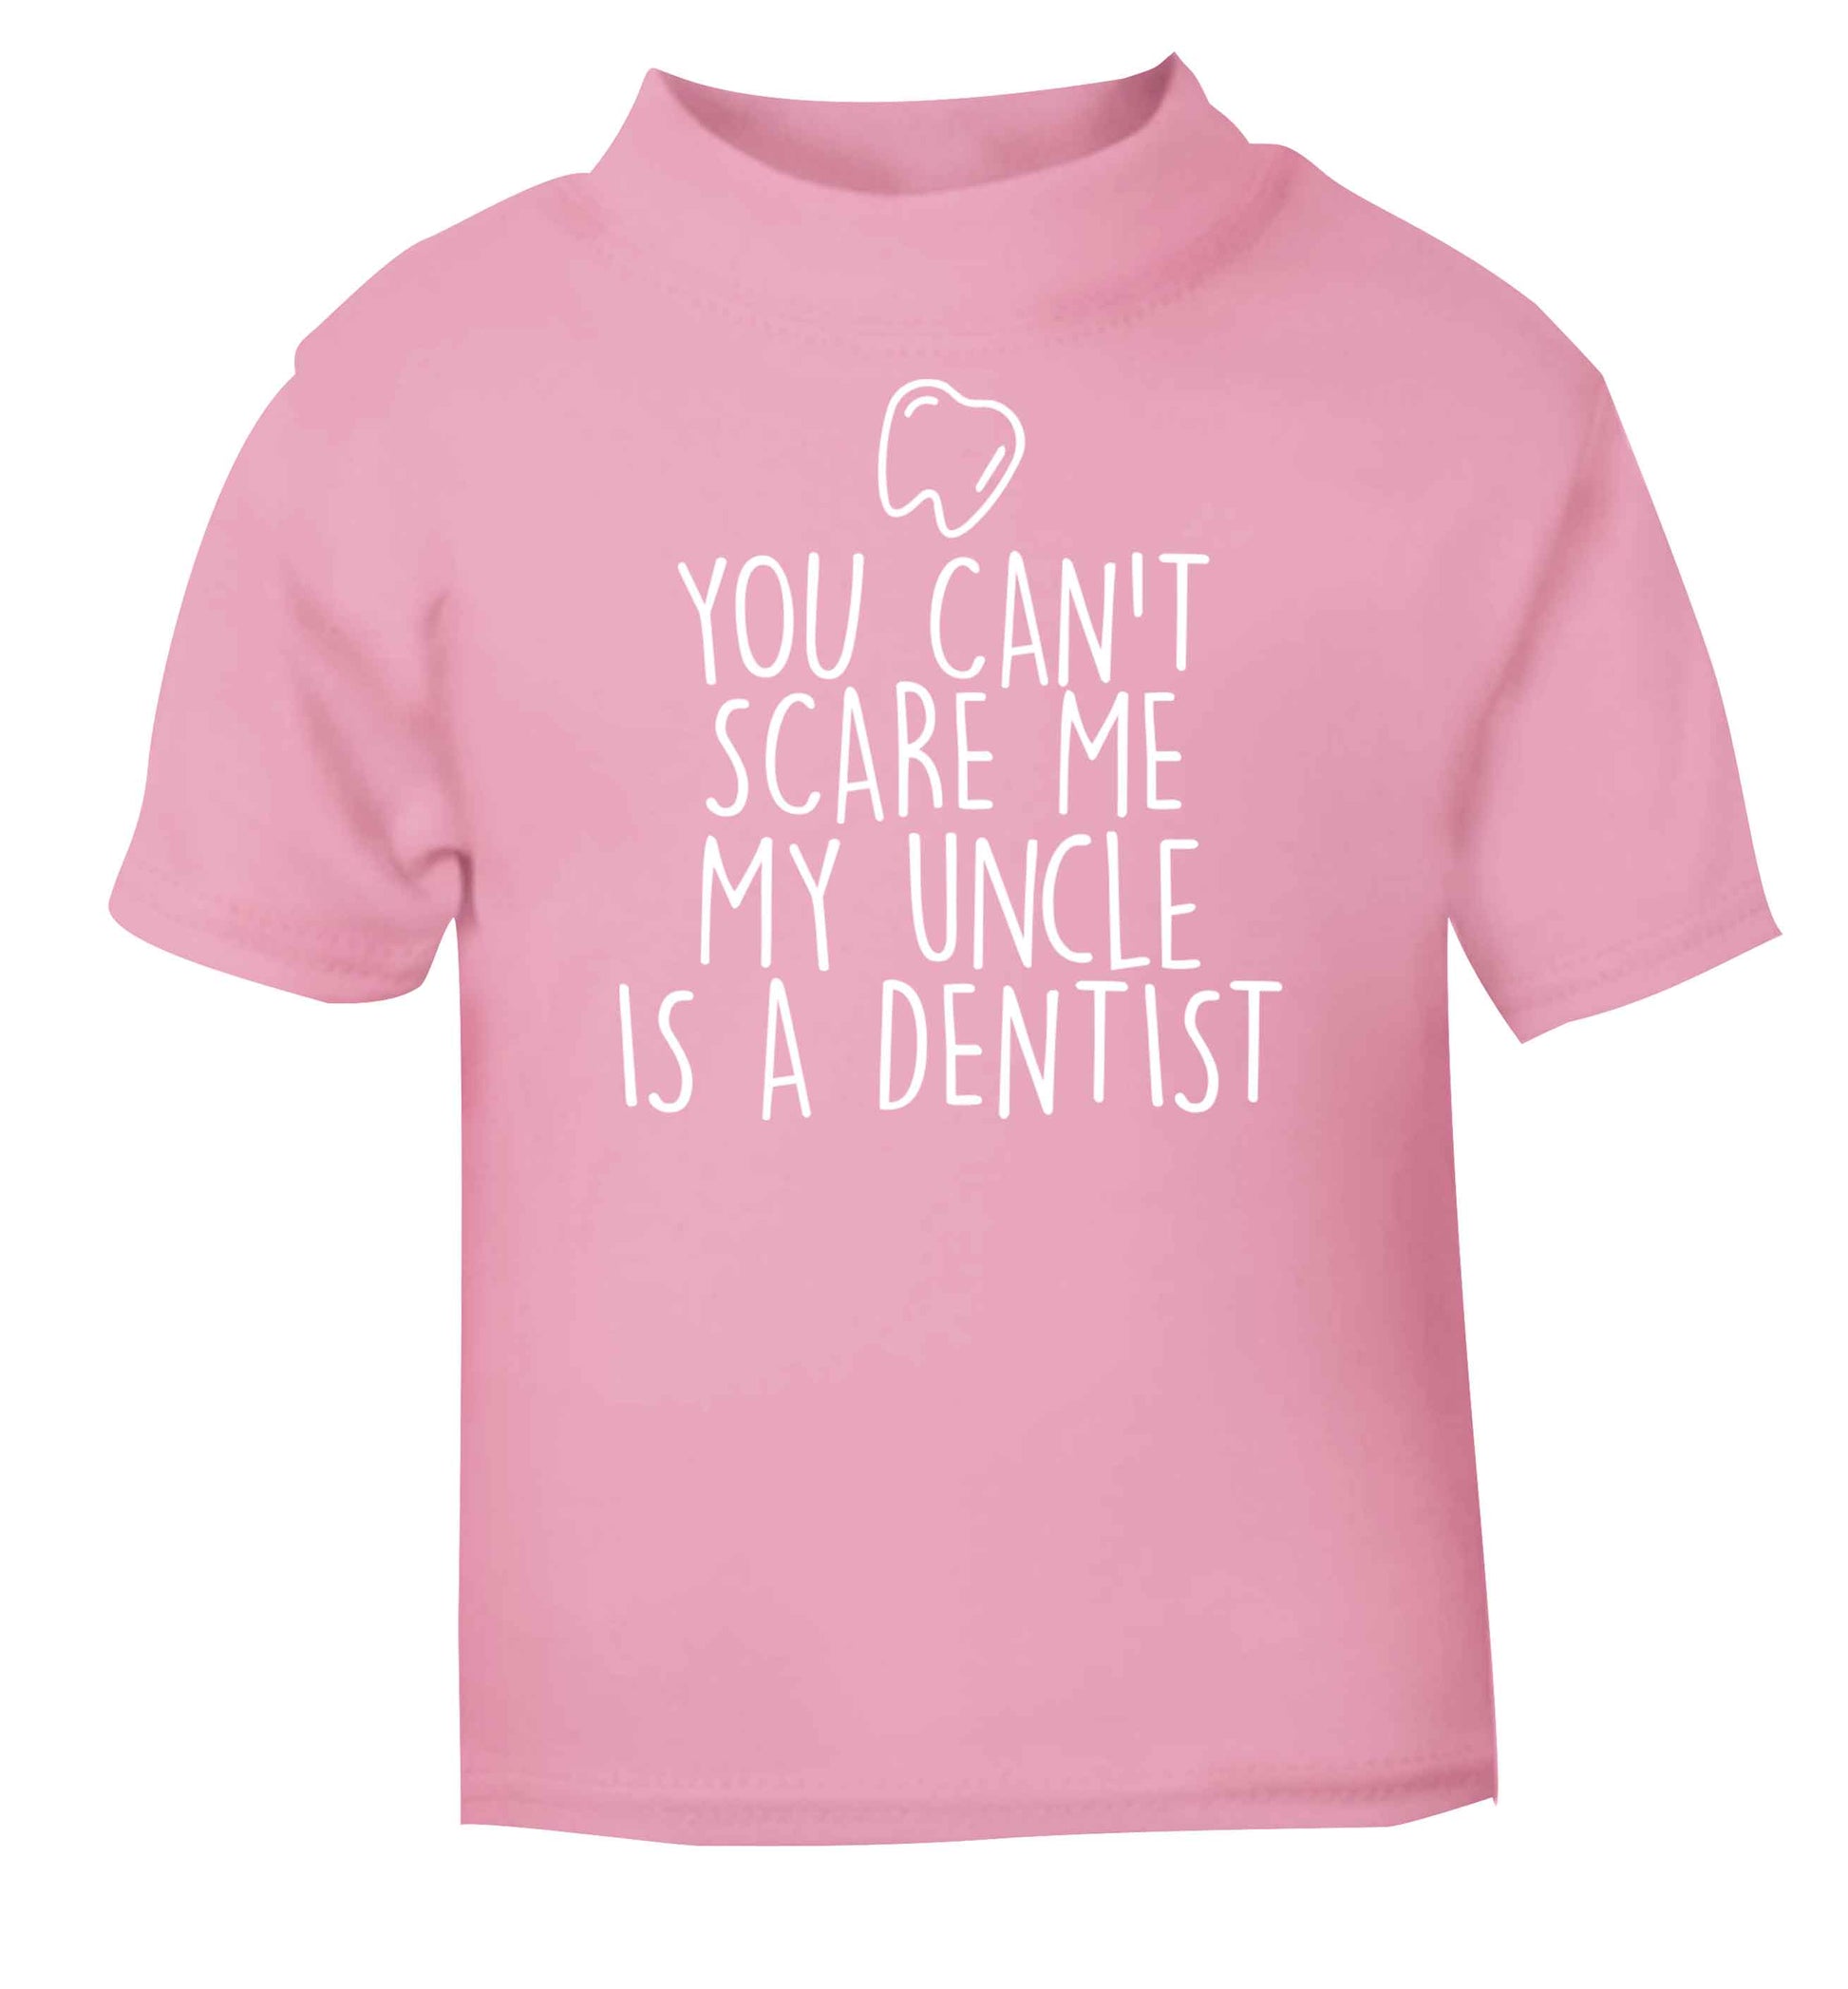 You can't scare me my uncle is a dentist light pink baby toddler Tshirt 2 Years